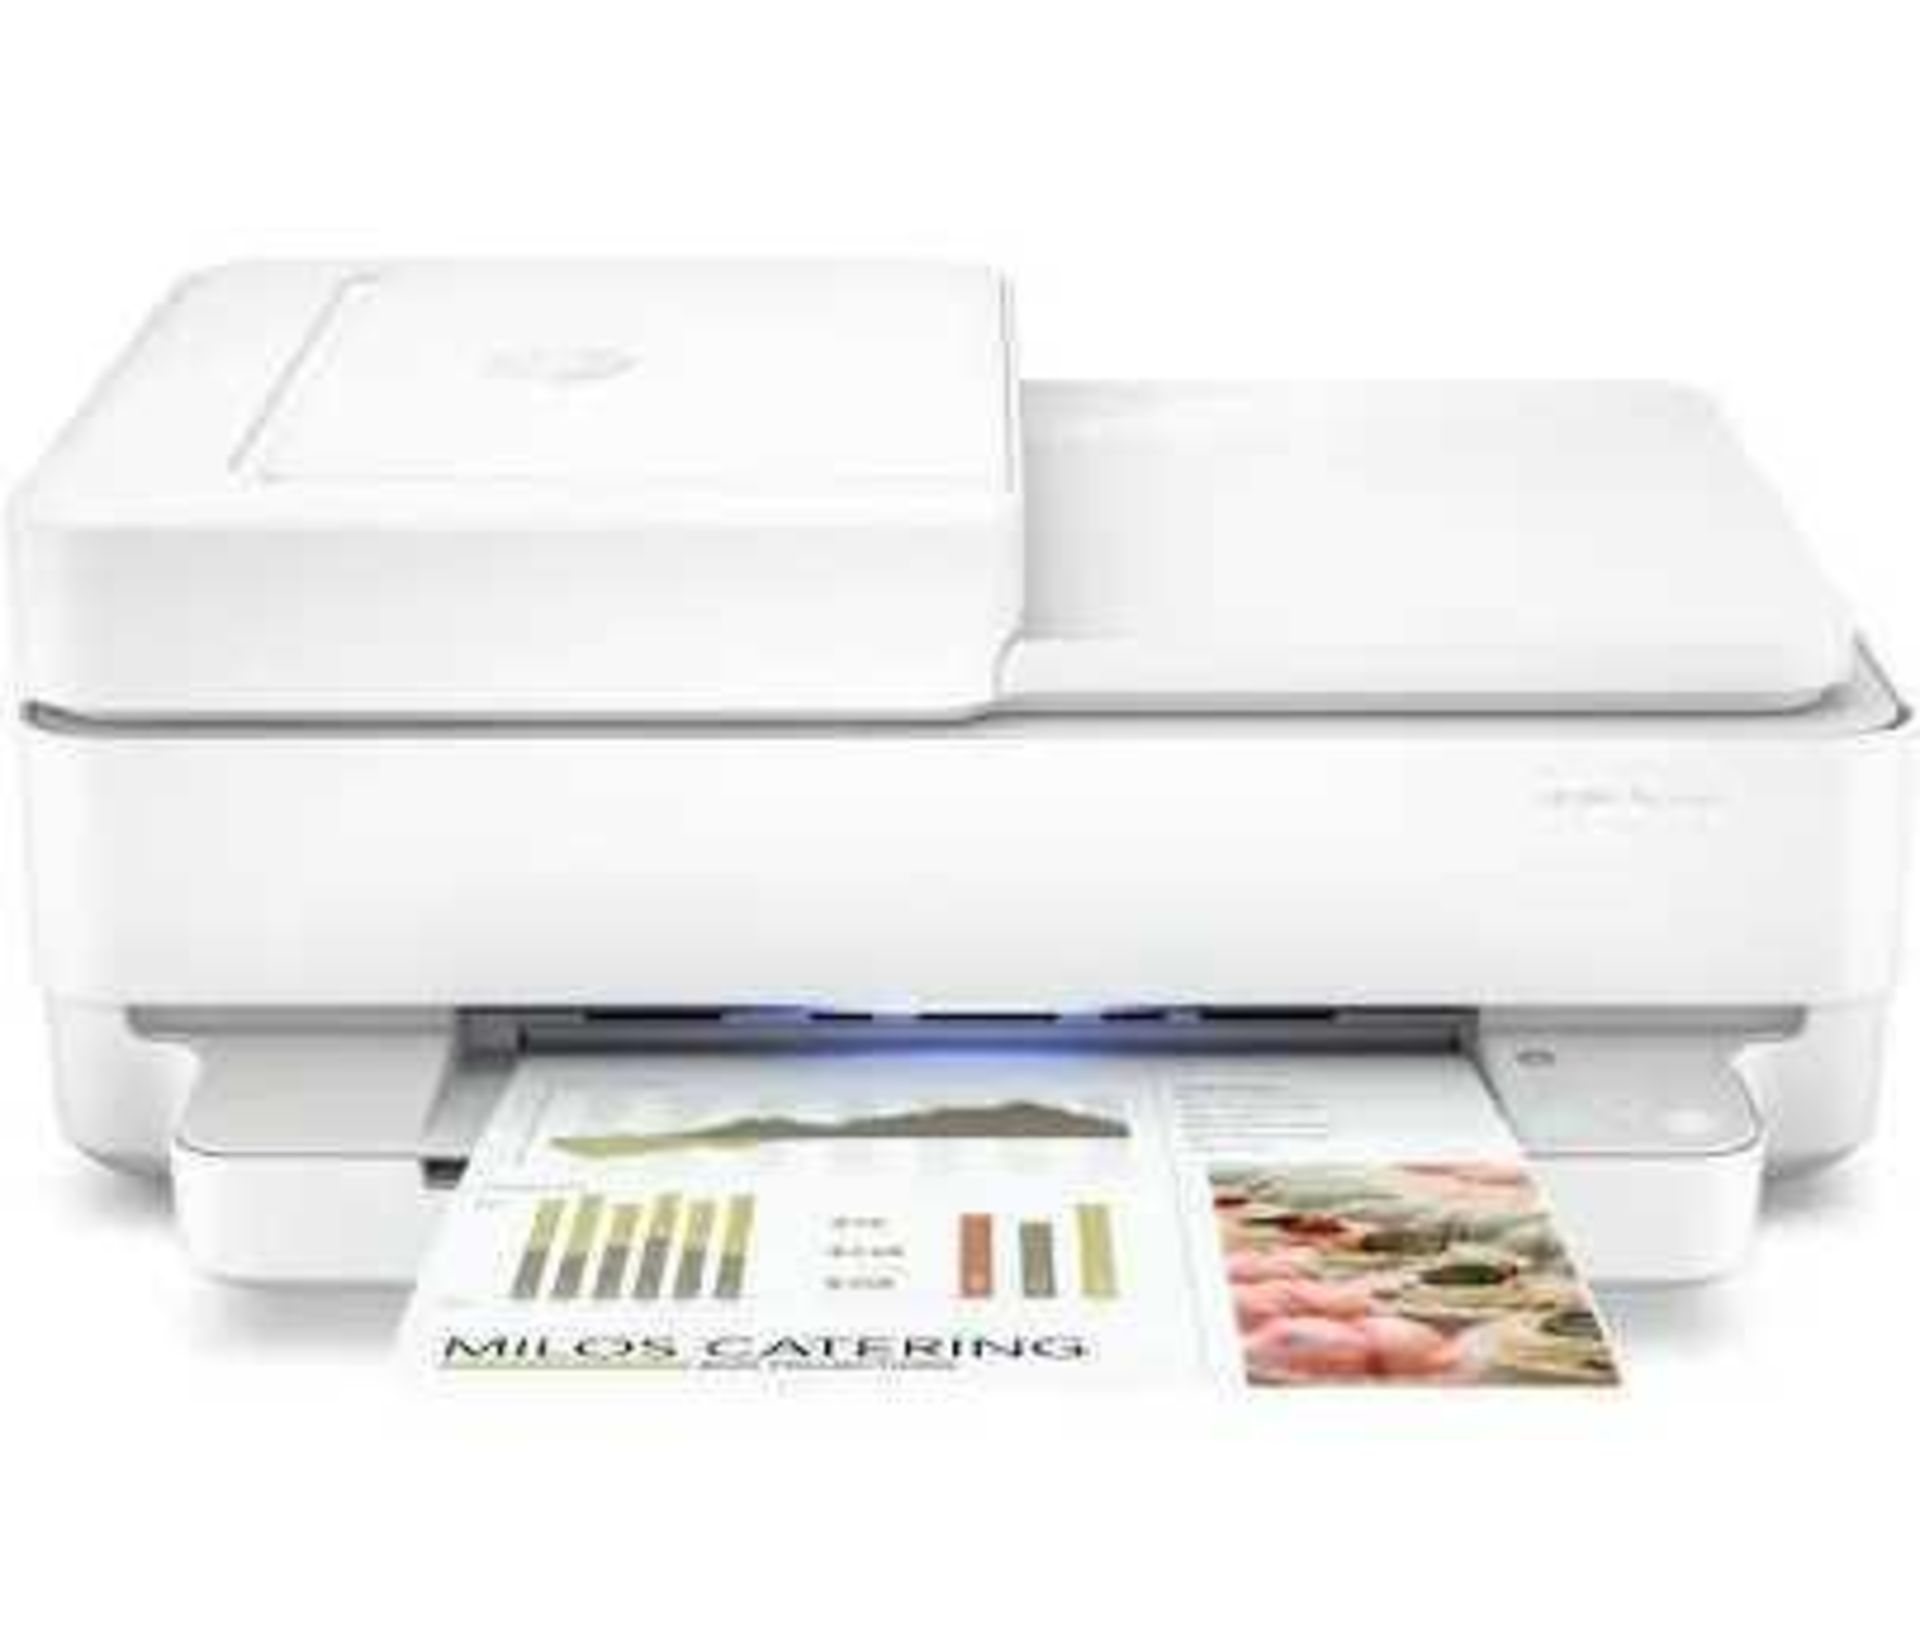 RRP £100 Boxed Hp Envy Pro 6430E All In One Wireless Printer